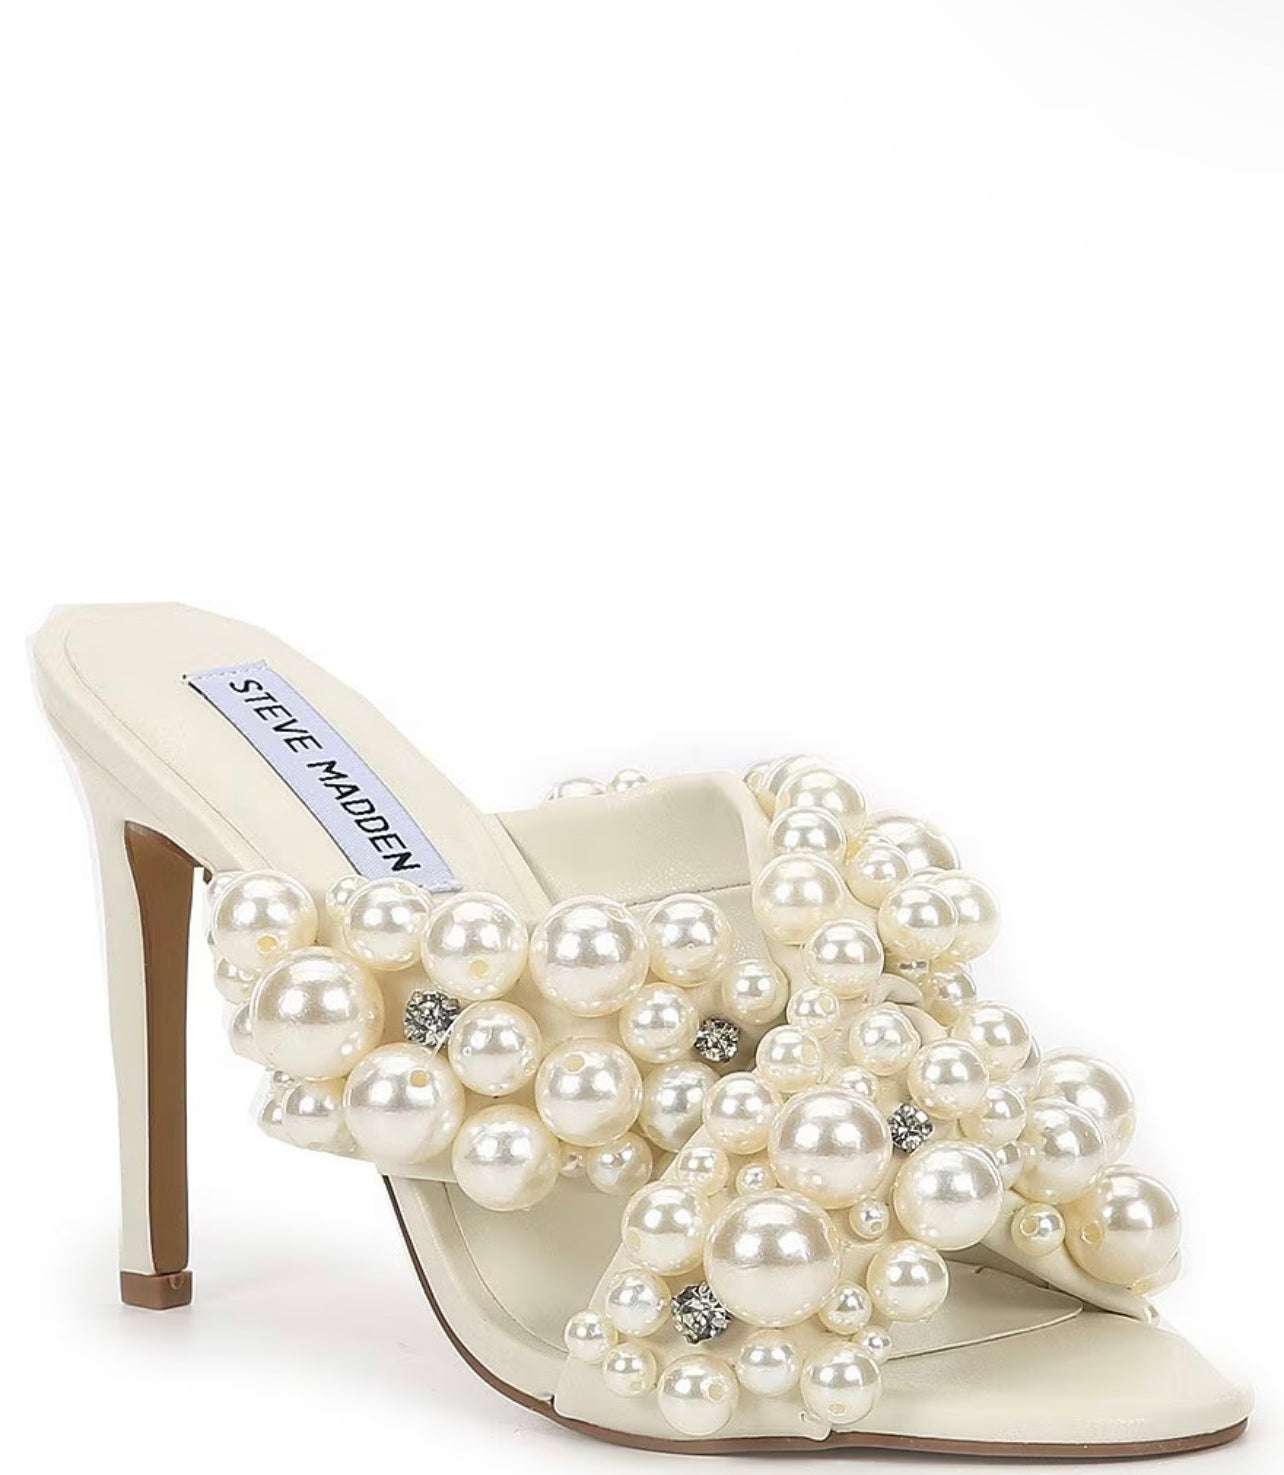 Steve Madden Mirabella Leather and Pearl Heel